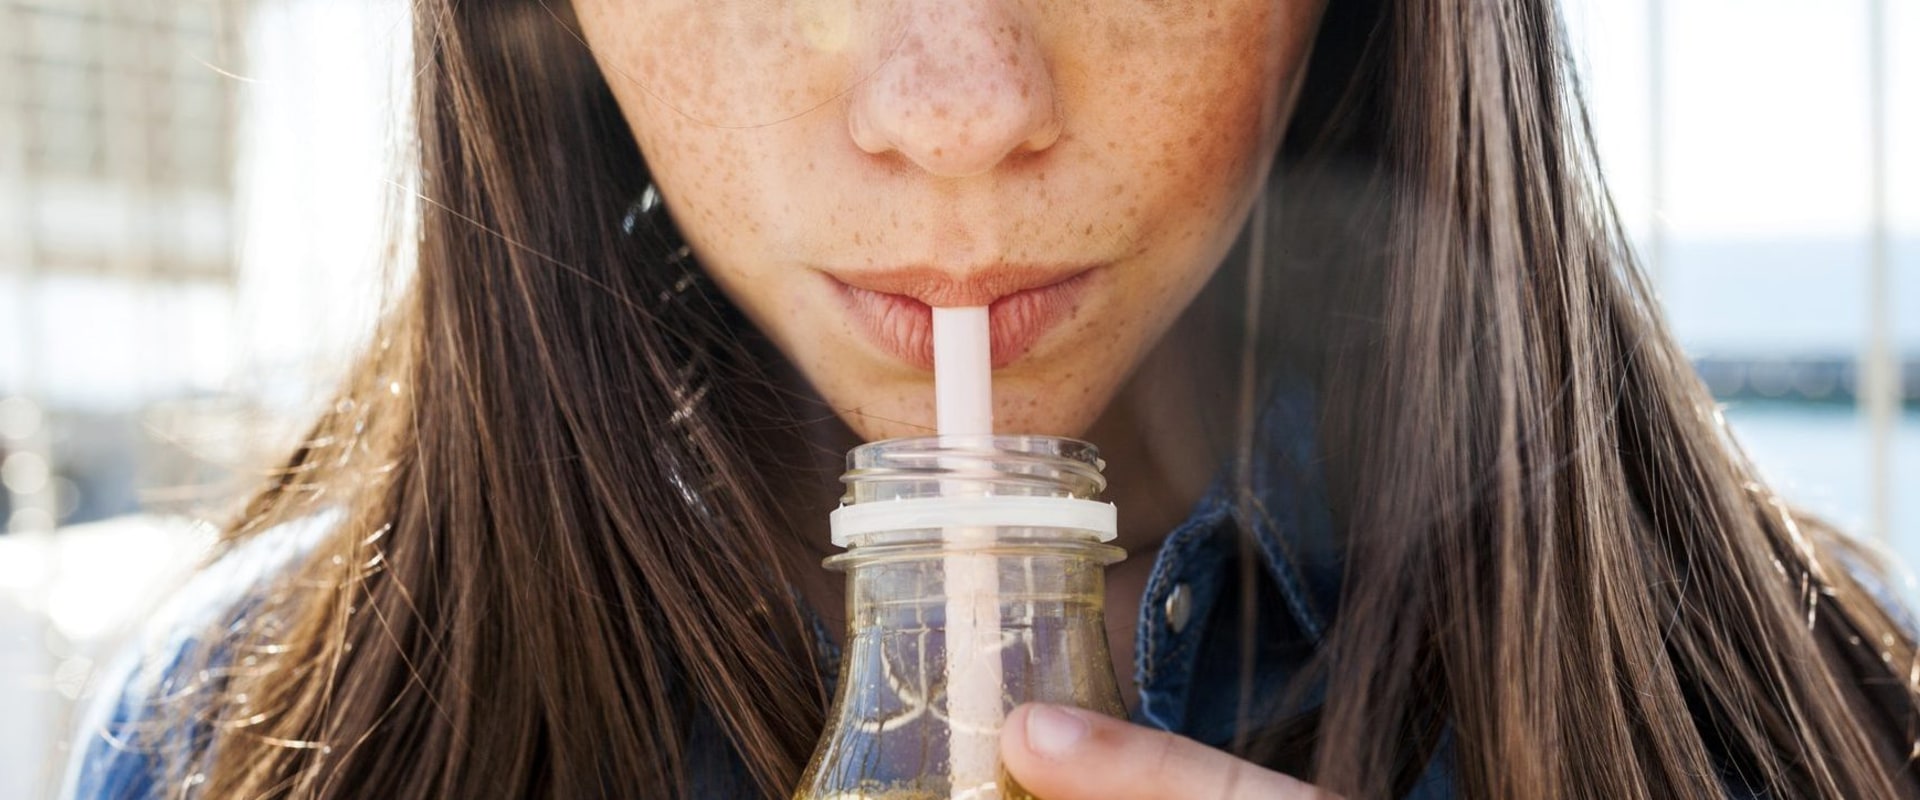 Why You Should Use a Straw When Drinking Beverages